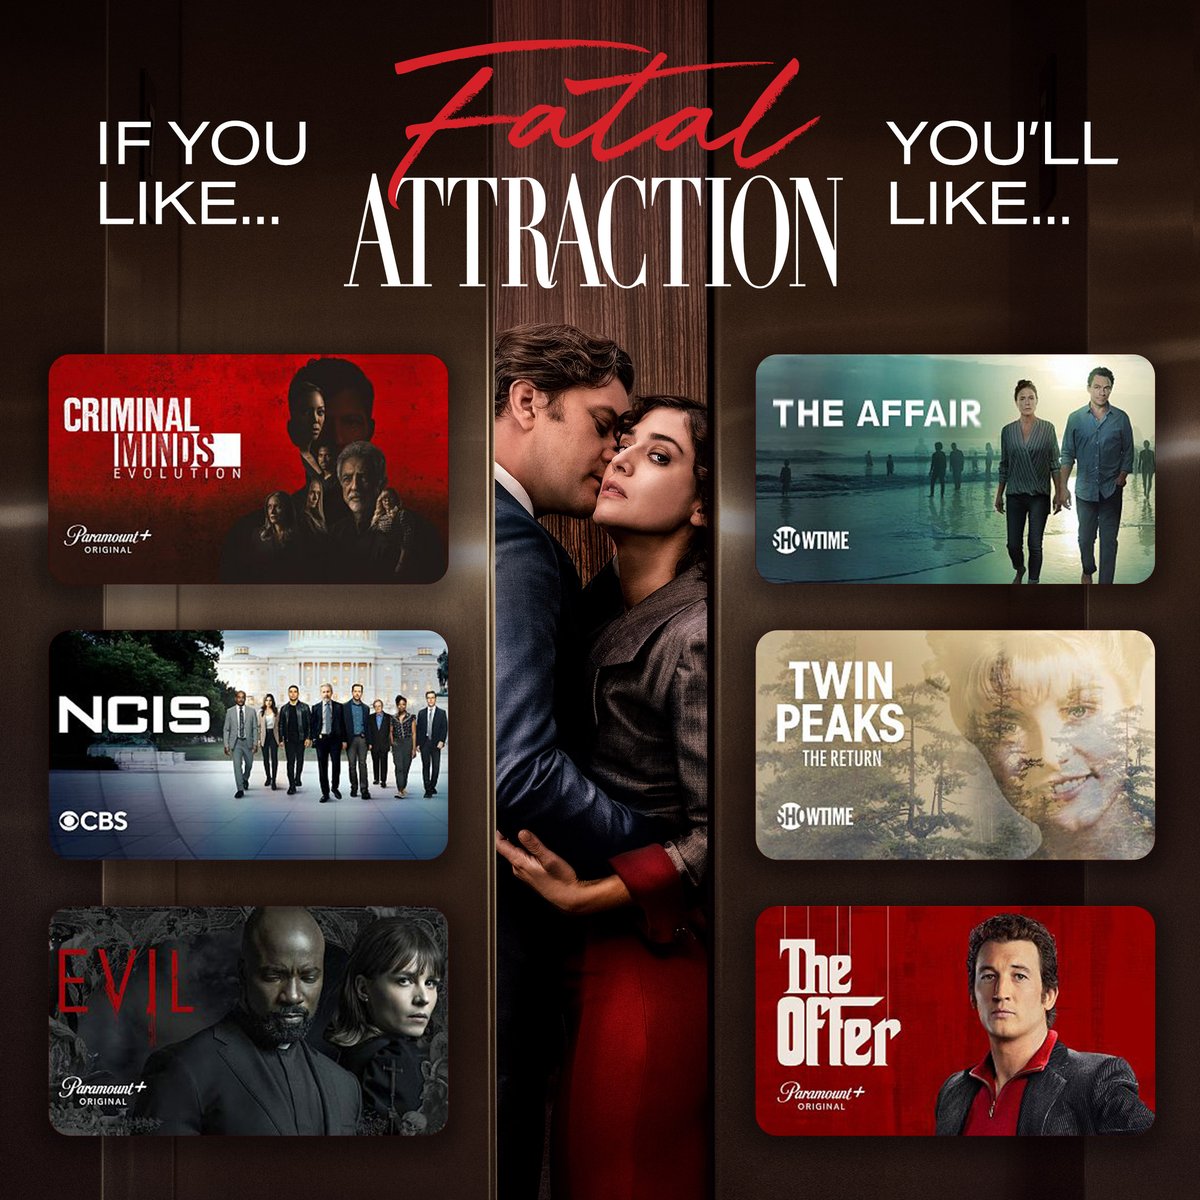 All caught up with @FatalAttraction? Give these other shows a try 😉 Streaming on Paramount+ with @Showtime.